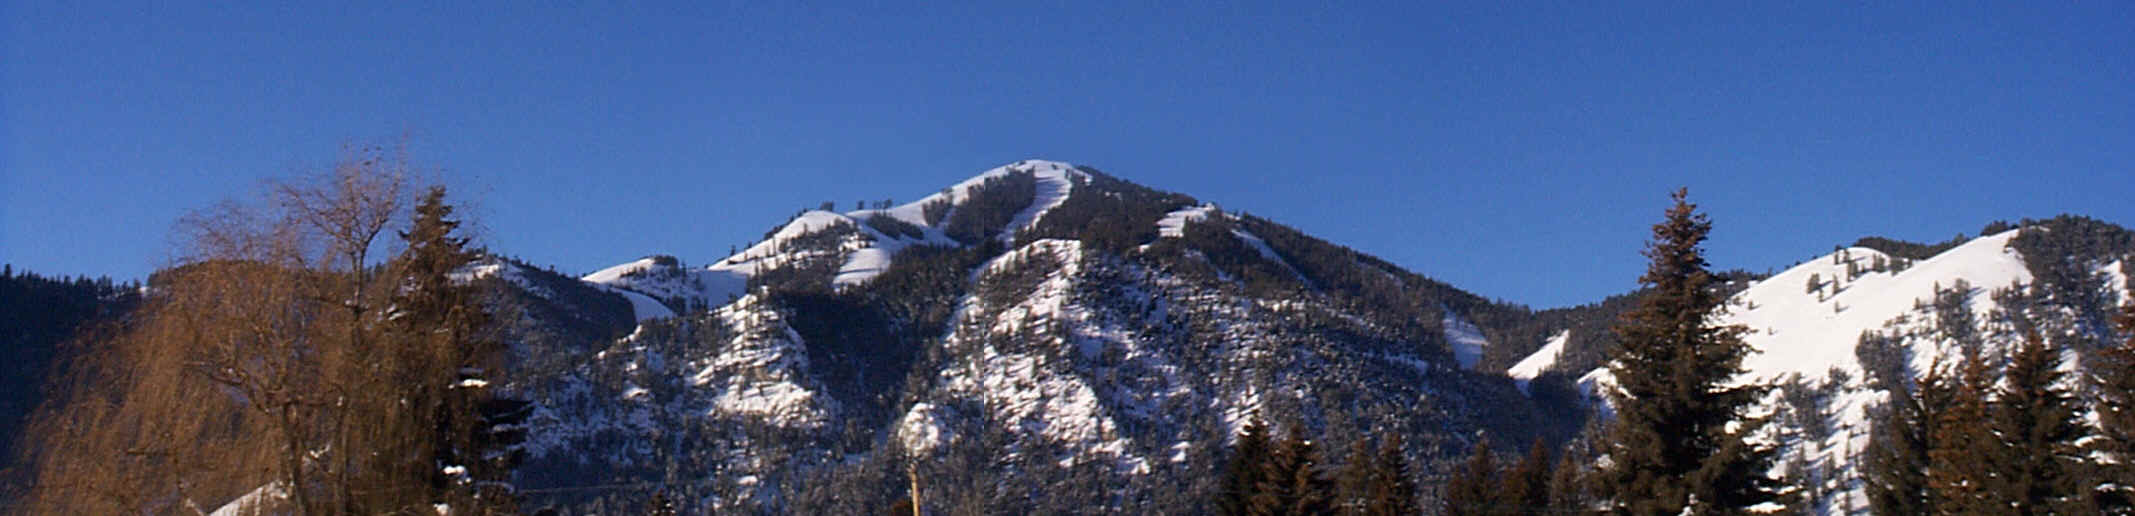 View of Bald Mountain from Unit 14 at the Colonnade